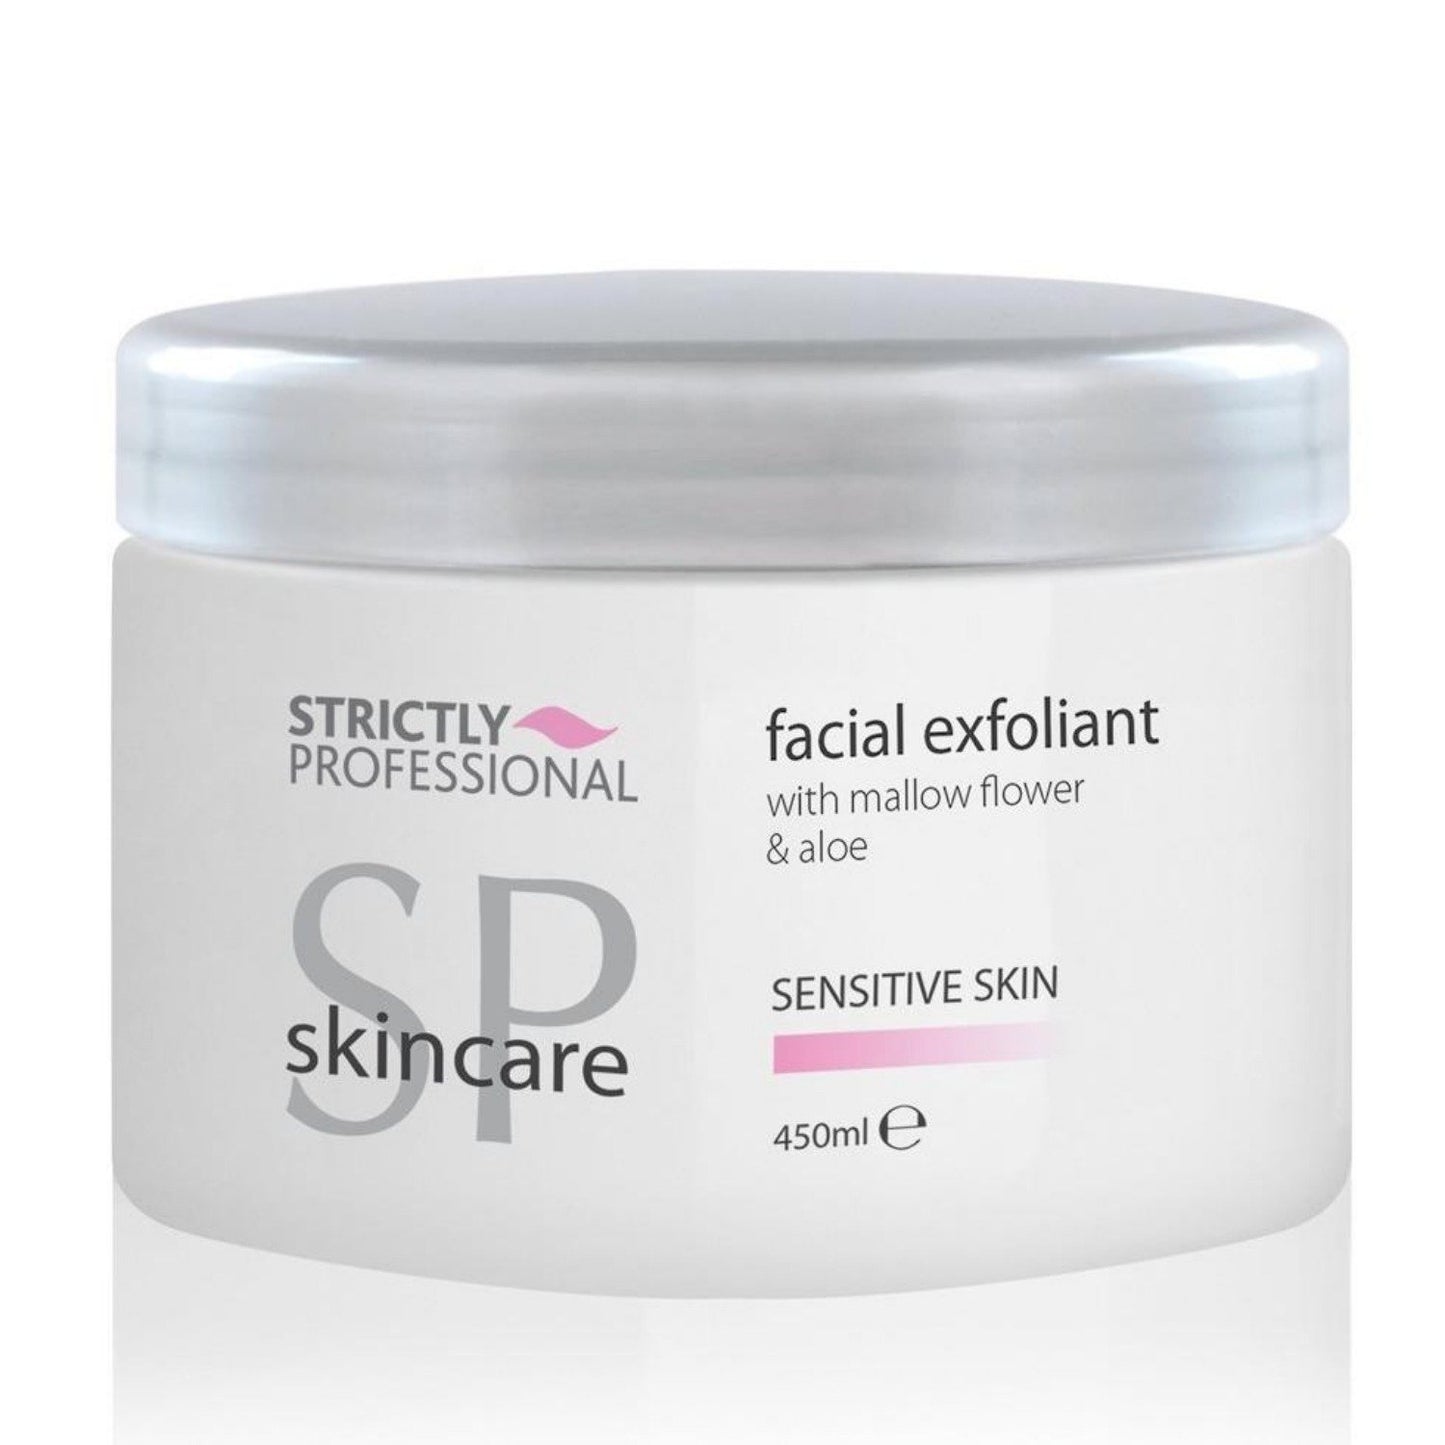 Strictly Professional Sensitive Skin Facial Exfoliant with Mallow Flower & Aloe 450ml (SHOP)